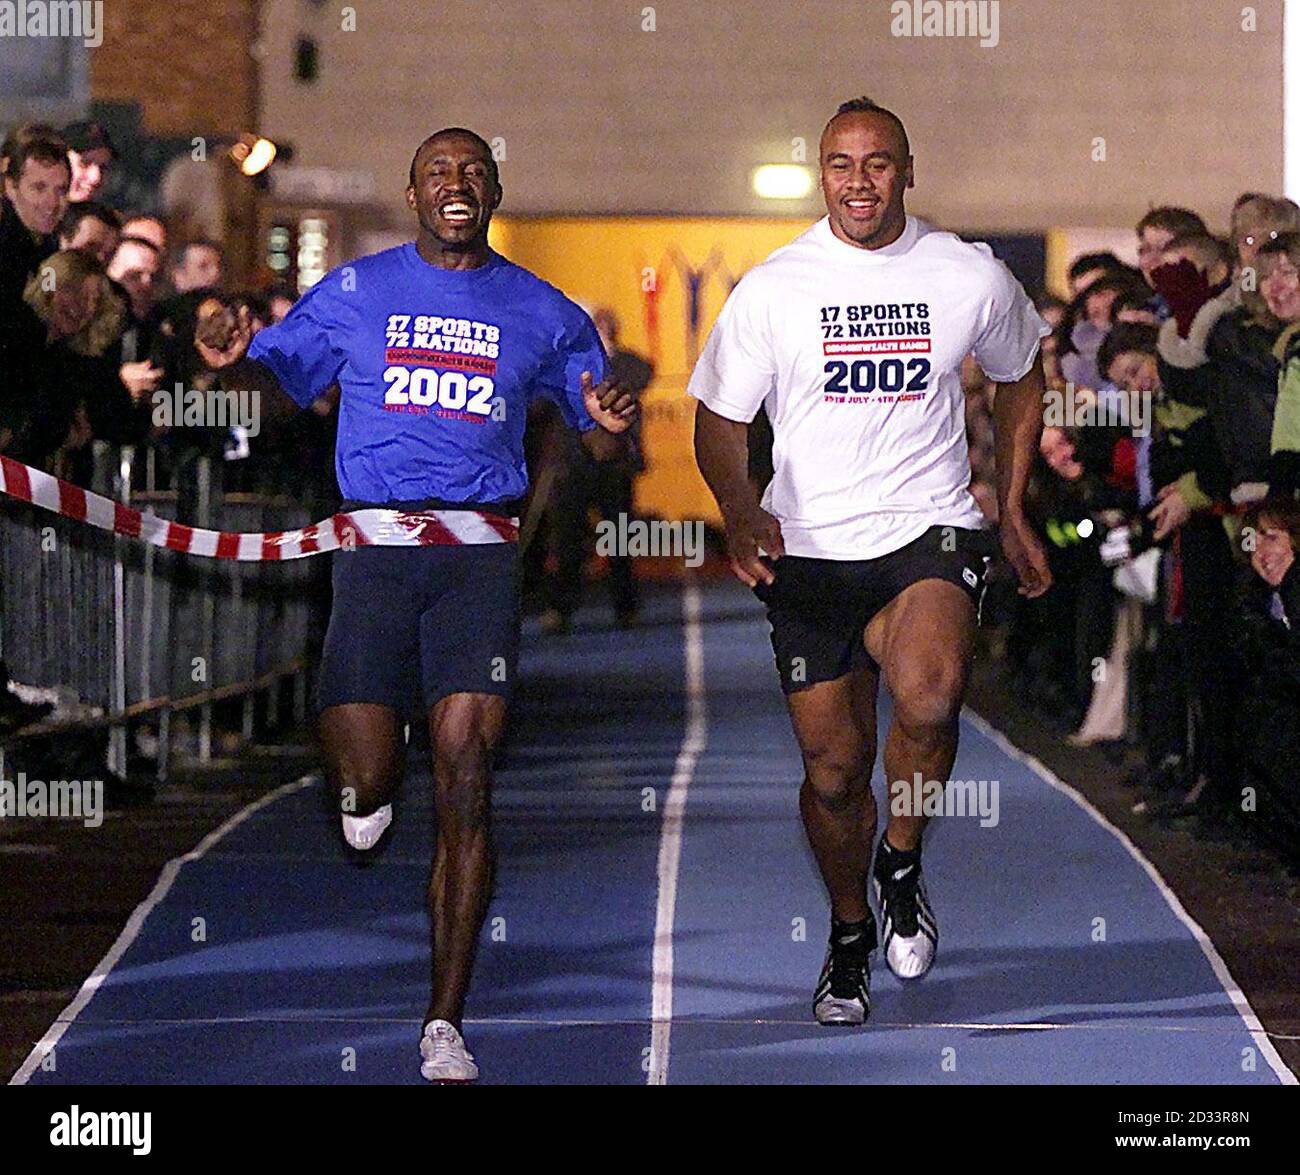 Linford Christie pips Jonah Lomu at the line in the 50 meter sprint at The Printworks, Manchester. New Zealand All Blacks' Jonah Lomu took on former Olympic gold medalist Linford Christie in a head-to-head sprint.  *   as part of the countdown towards the 2002 Commonwealth Games. Stock Photo